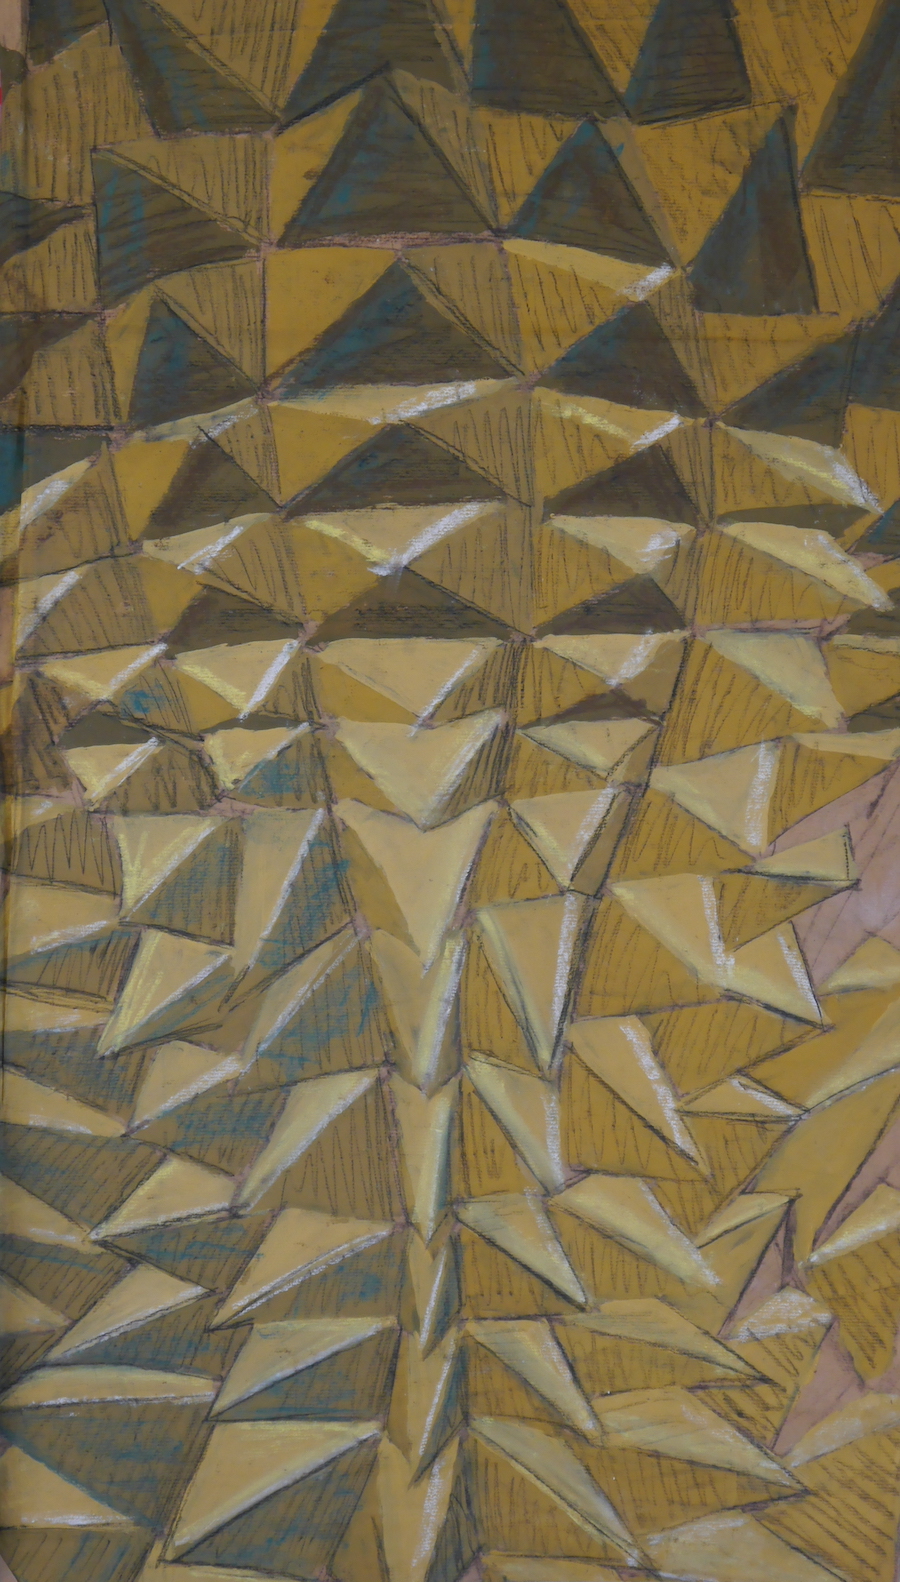 contemporary fine art pastel drawing of a folded pyramid surface in ochre by saatchiart artist Christian Dodd